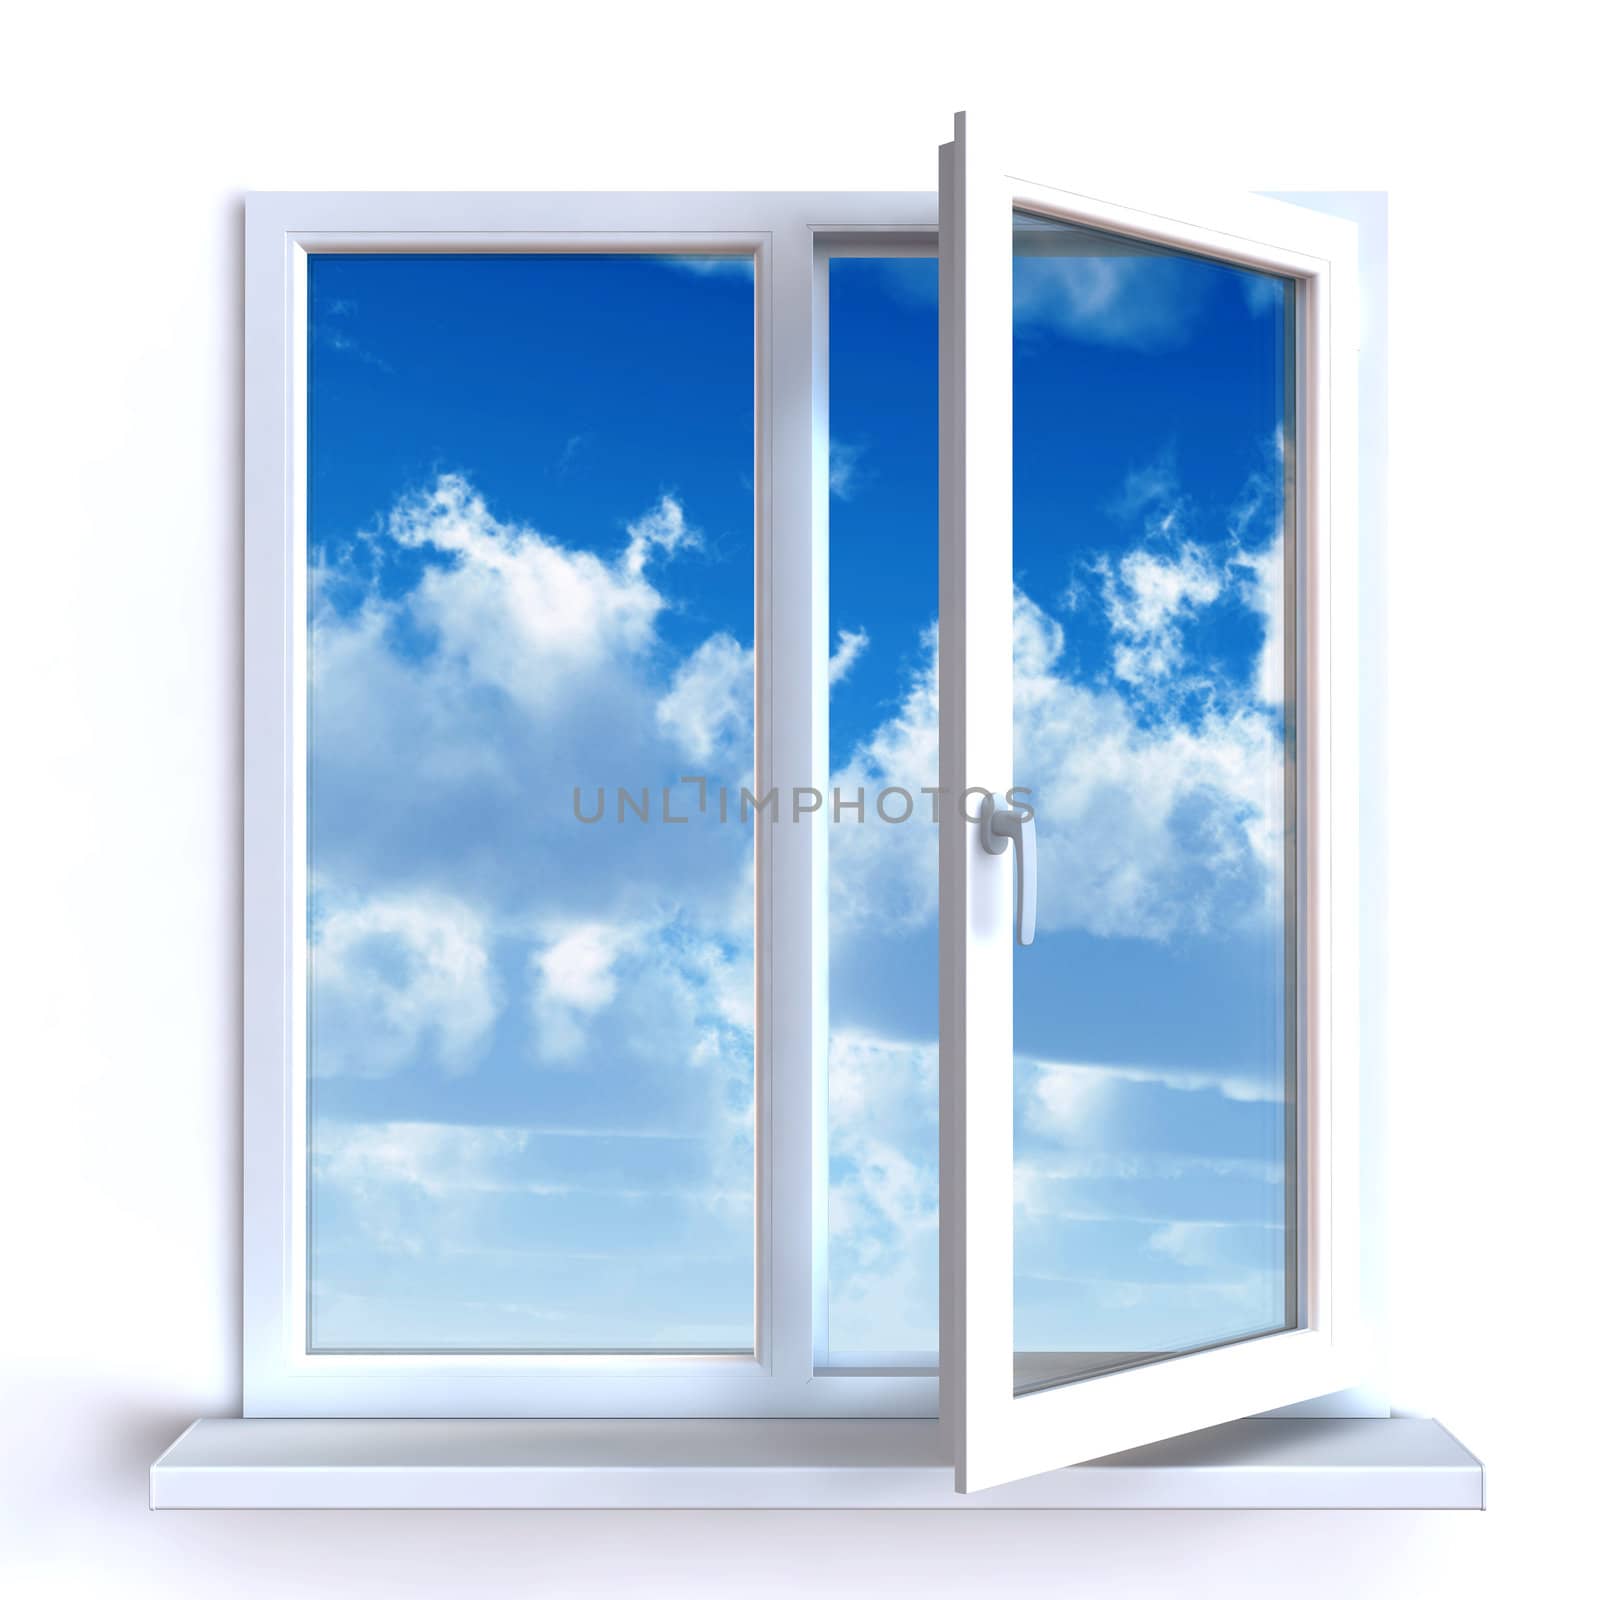 Open window against a white wall and the cloudy sky and sun